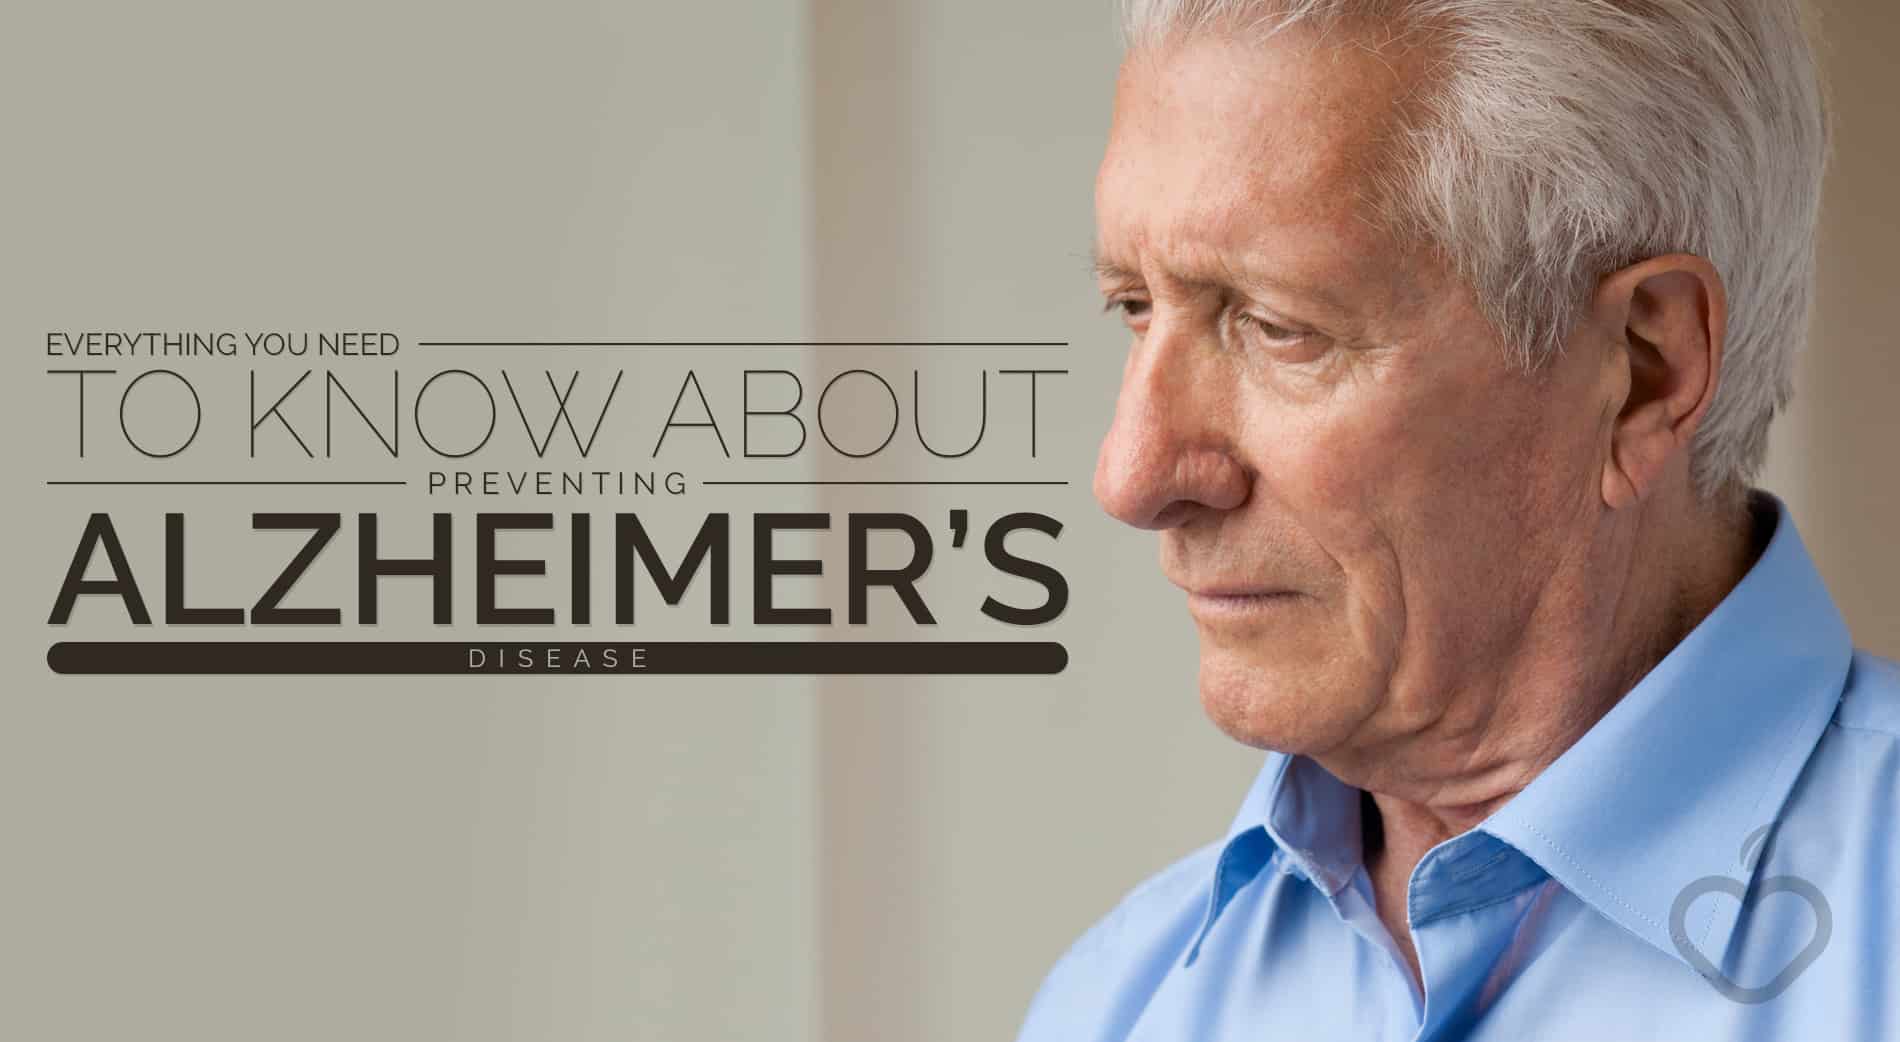 Everything You Need To Know About Preventing Alzheimerâs ...